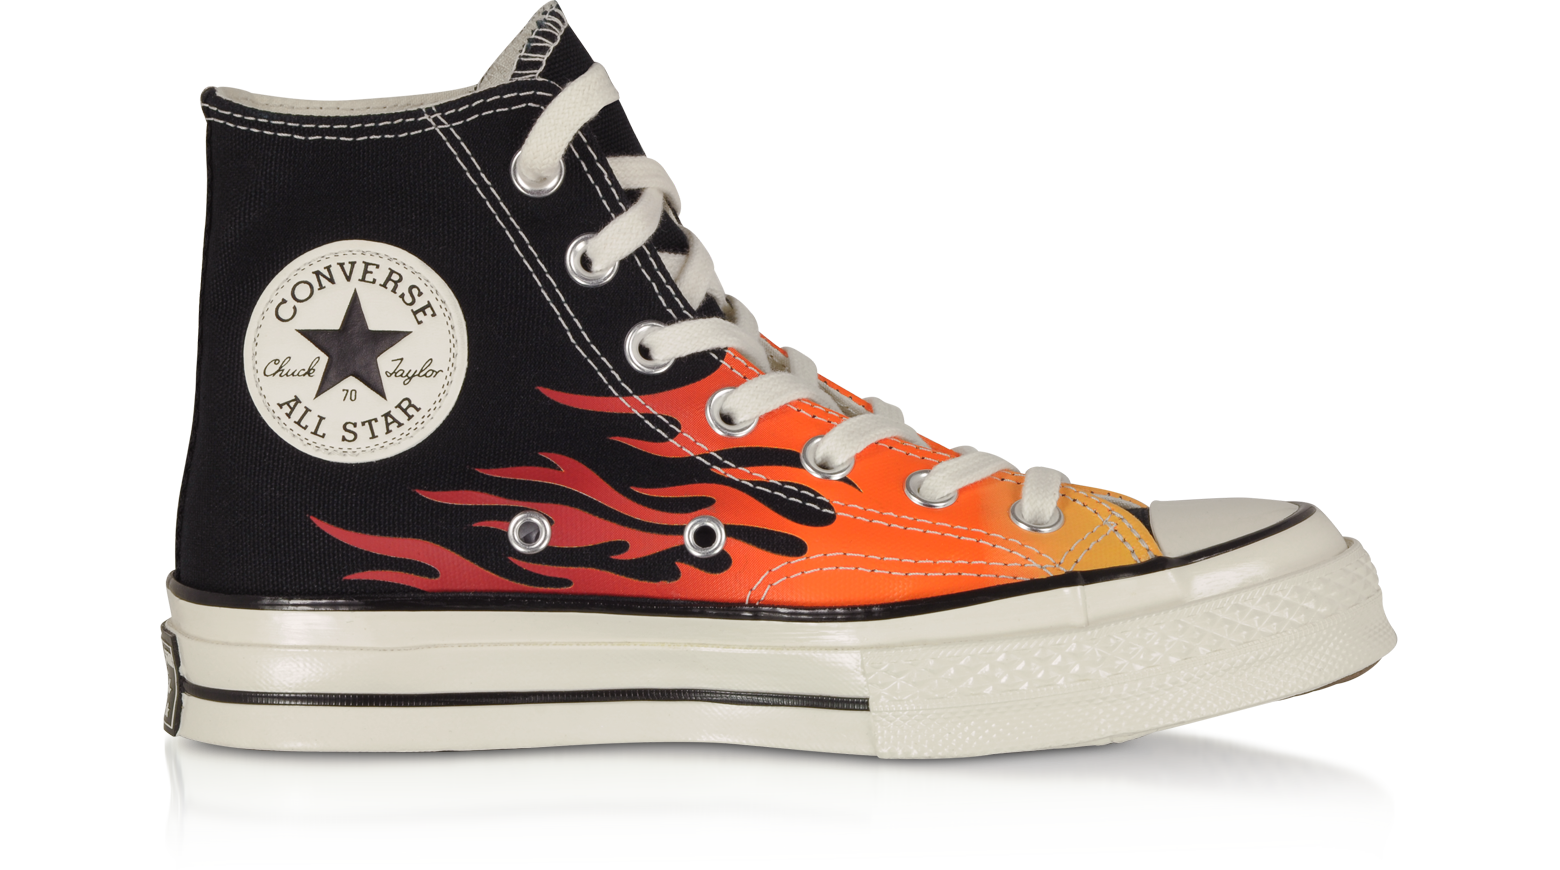 converse limited edition 2018 35